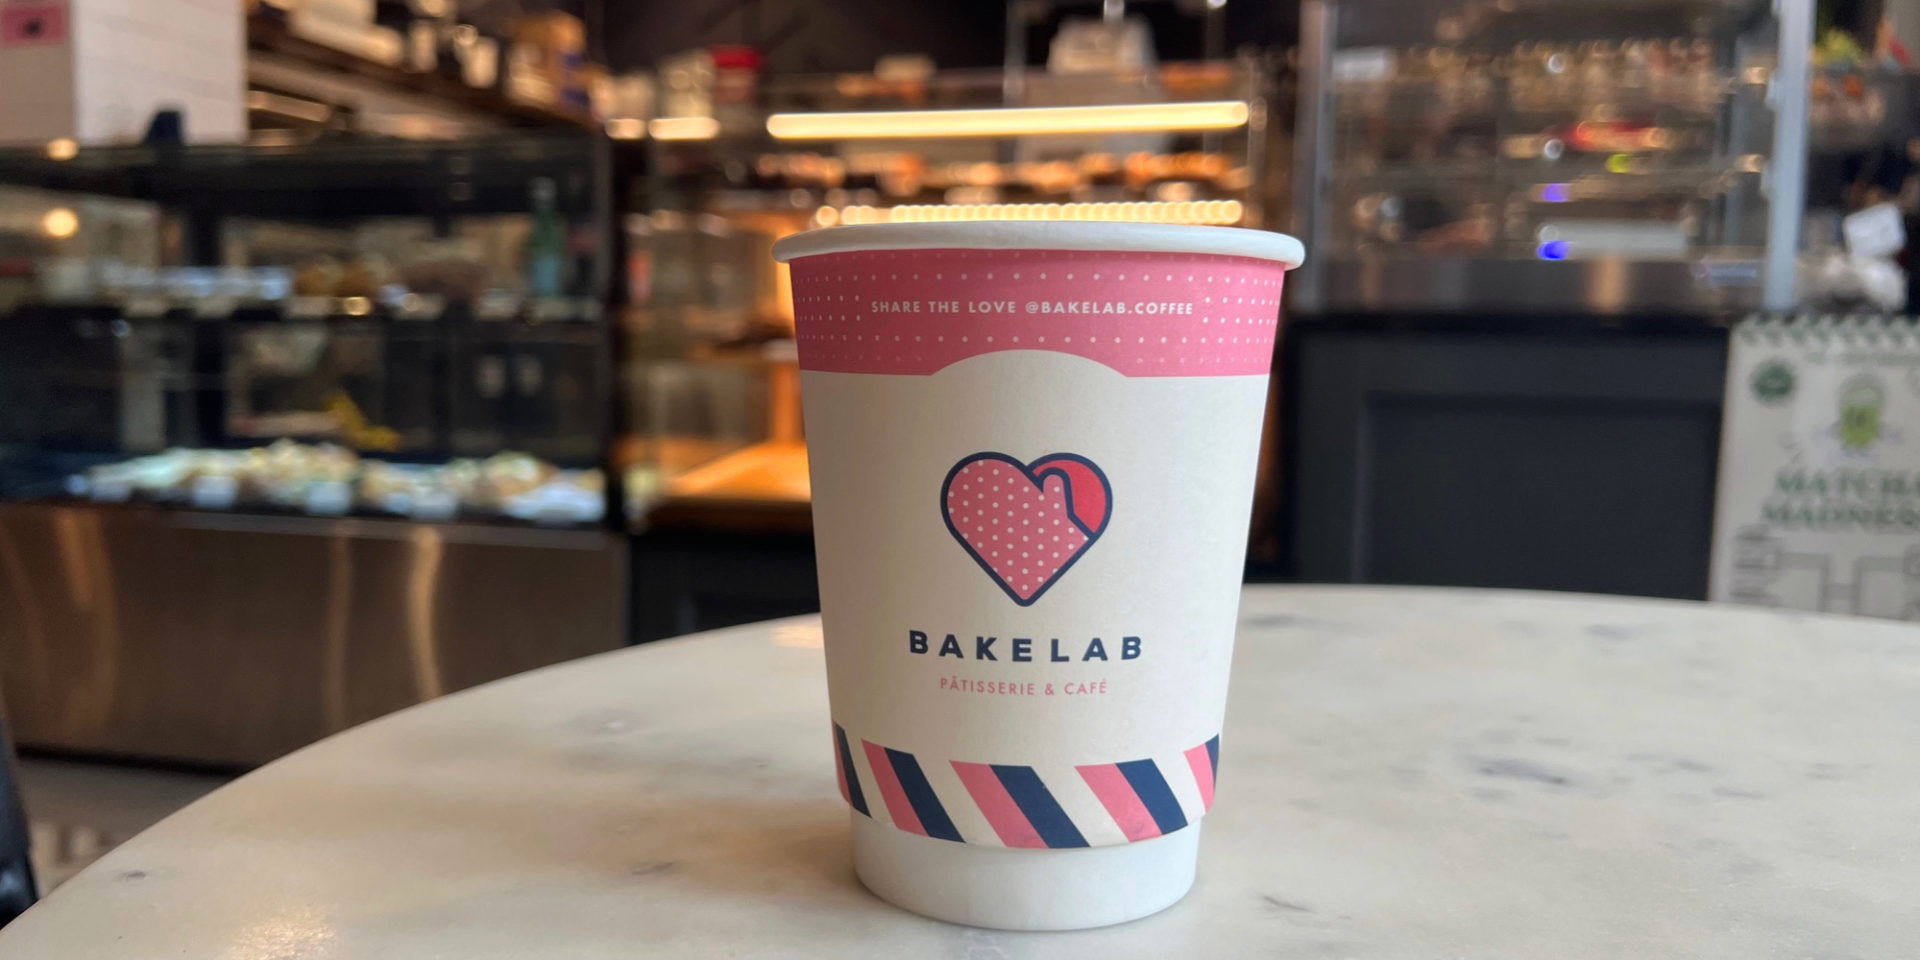 A white paper cup with the branding of BakeLab sits on a white marble table inside the coffeeshop.